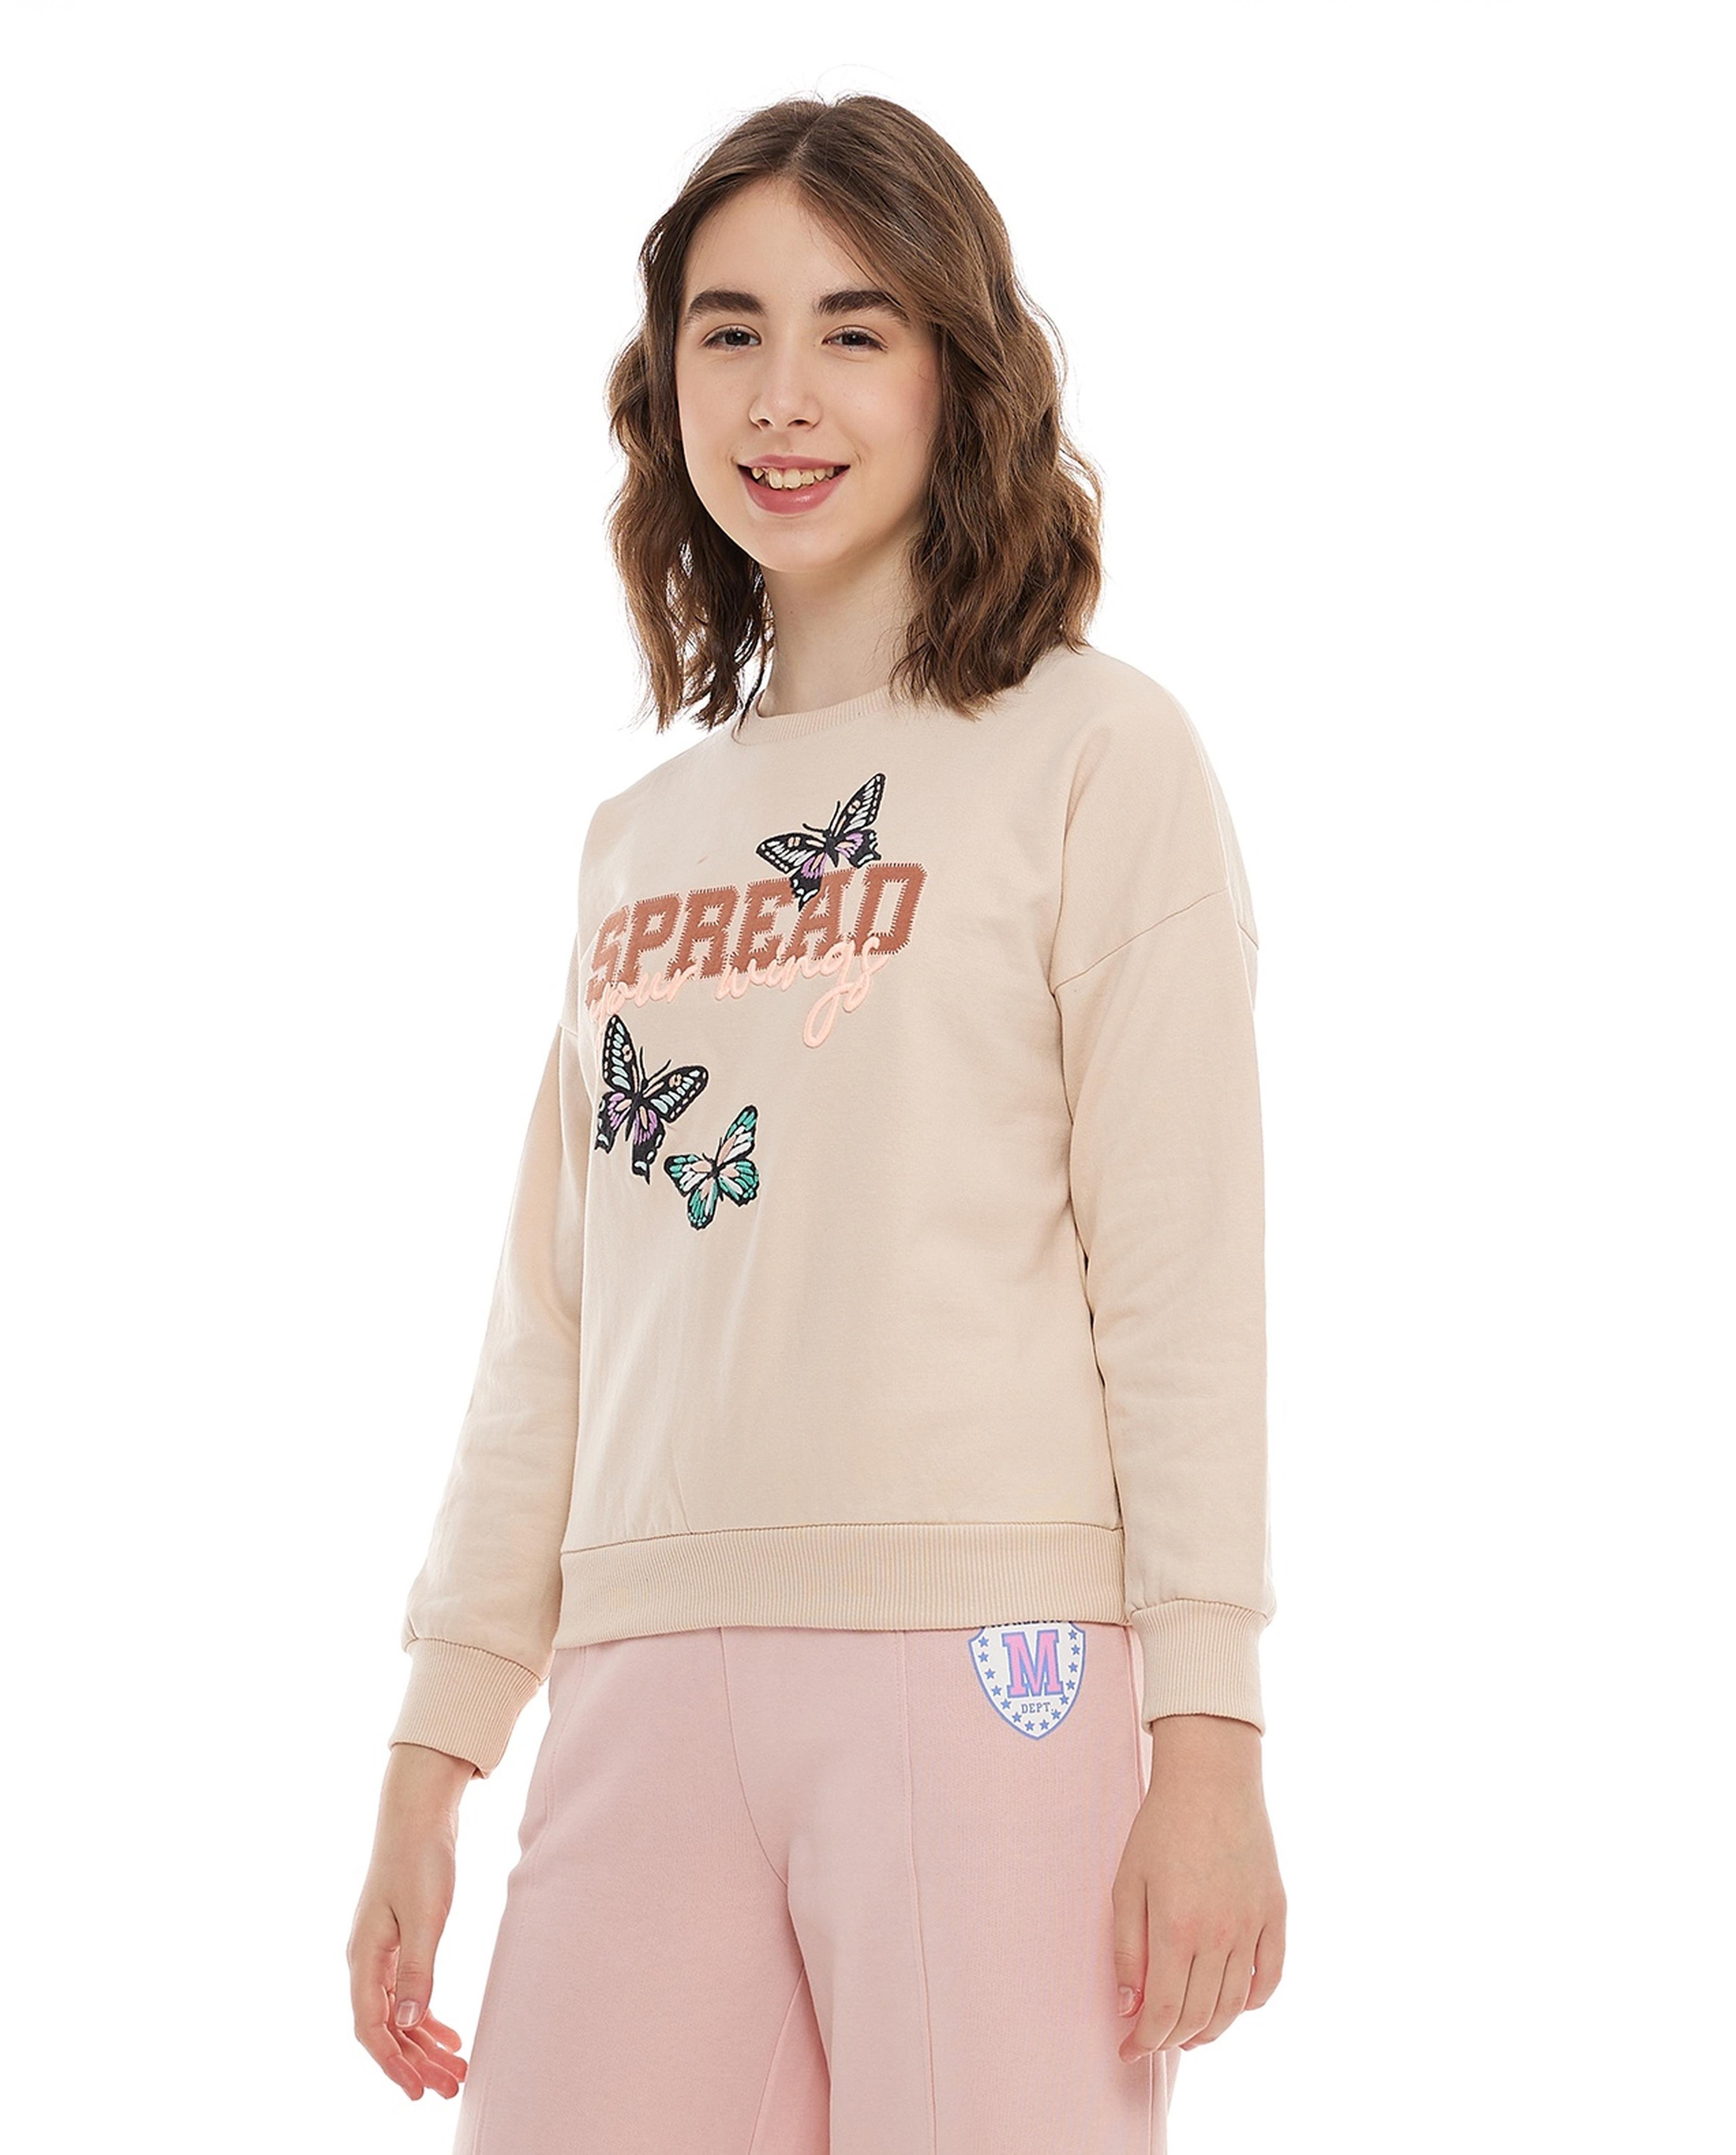 Embroidered Sweatshirt with Crew Neck and Long Sleeves